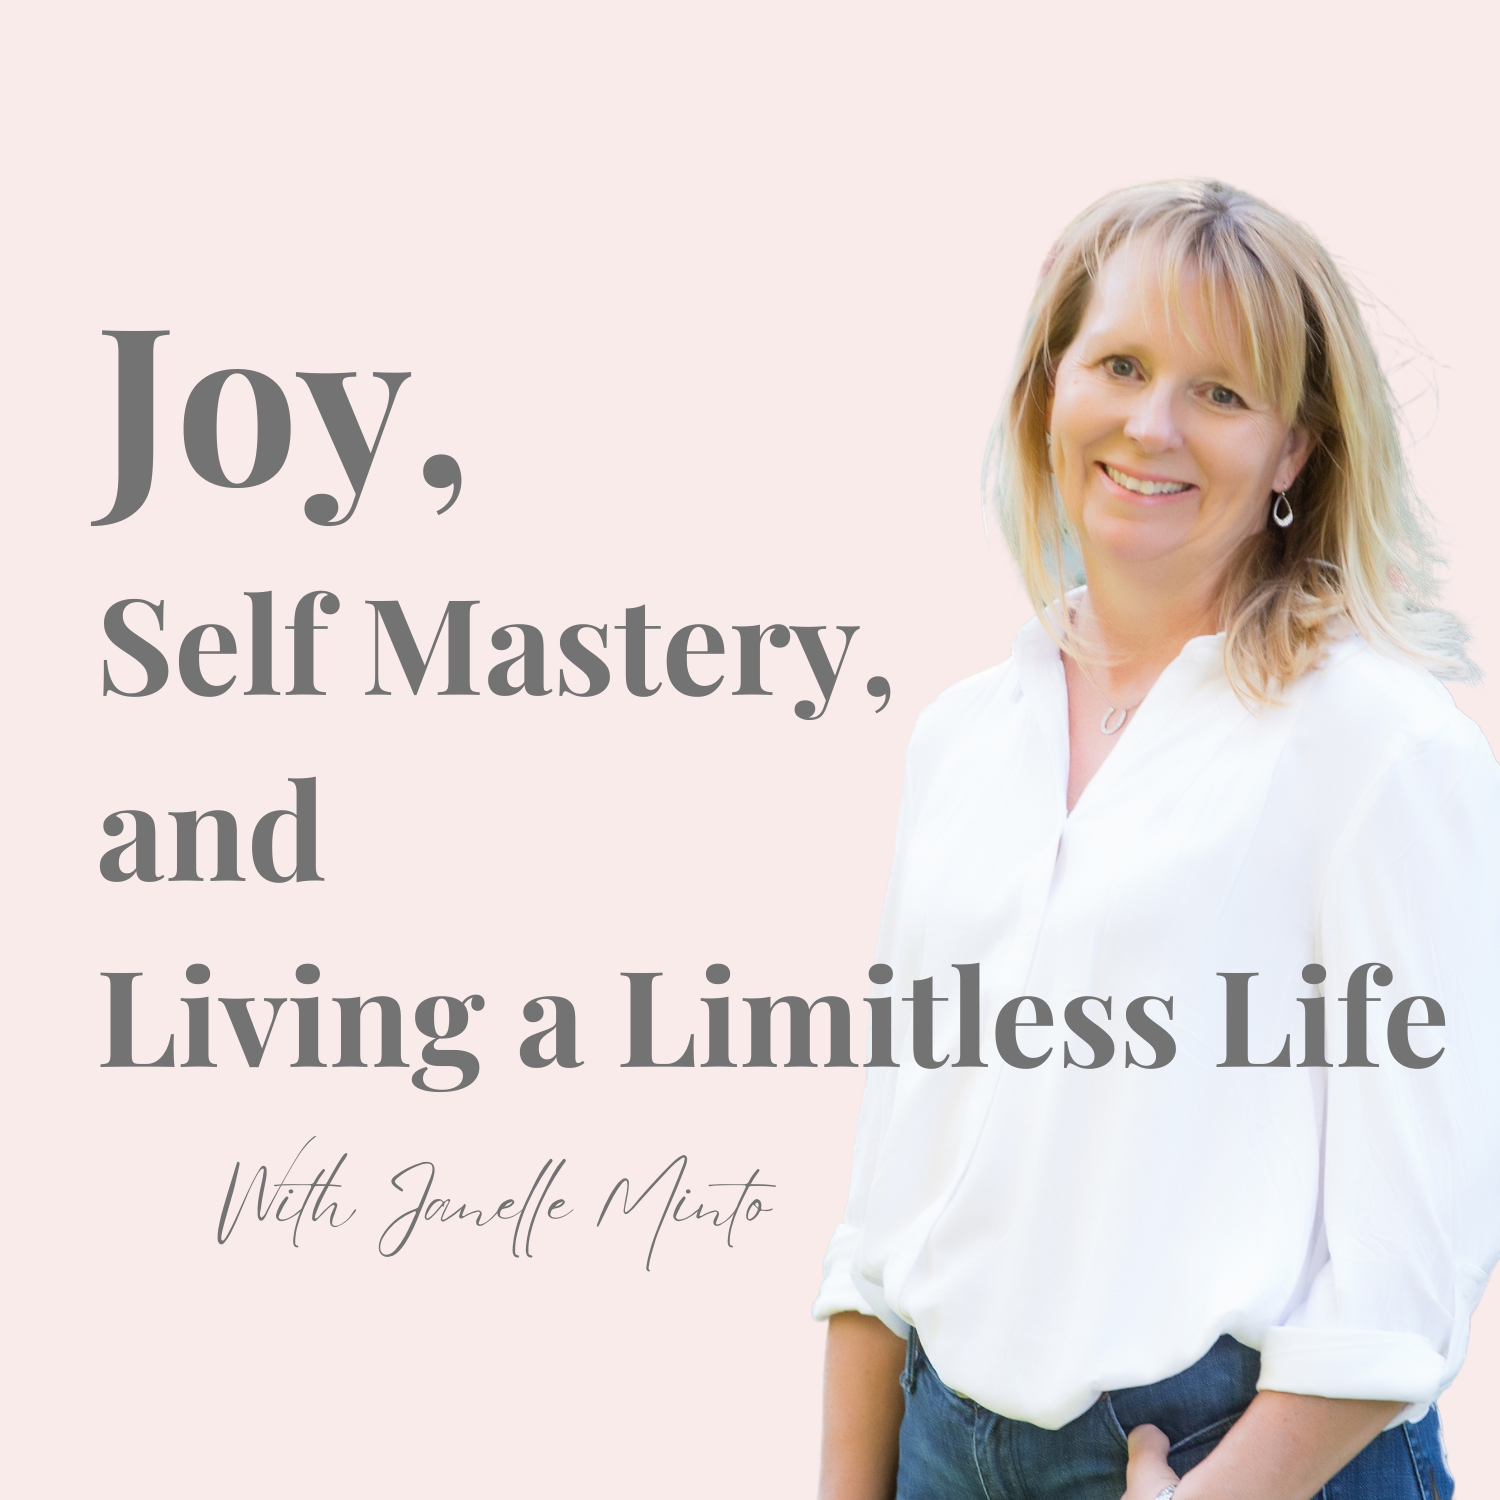 Joy, Self Mastery, and Living a Limitless Life